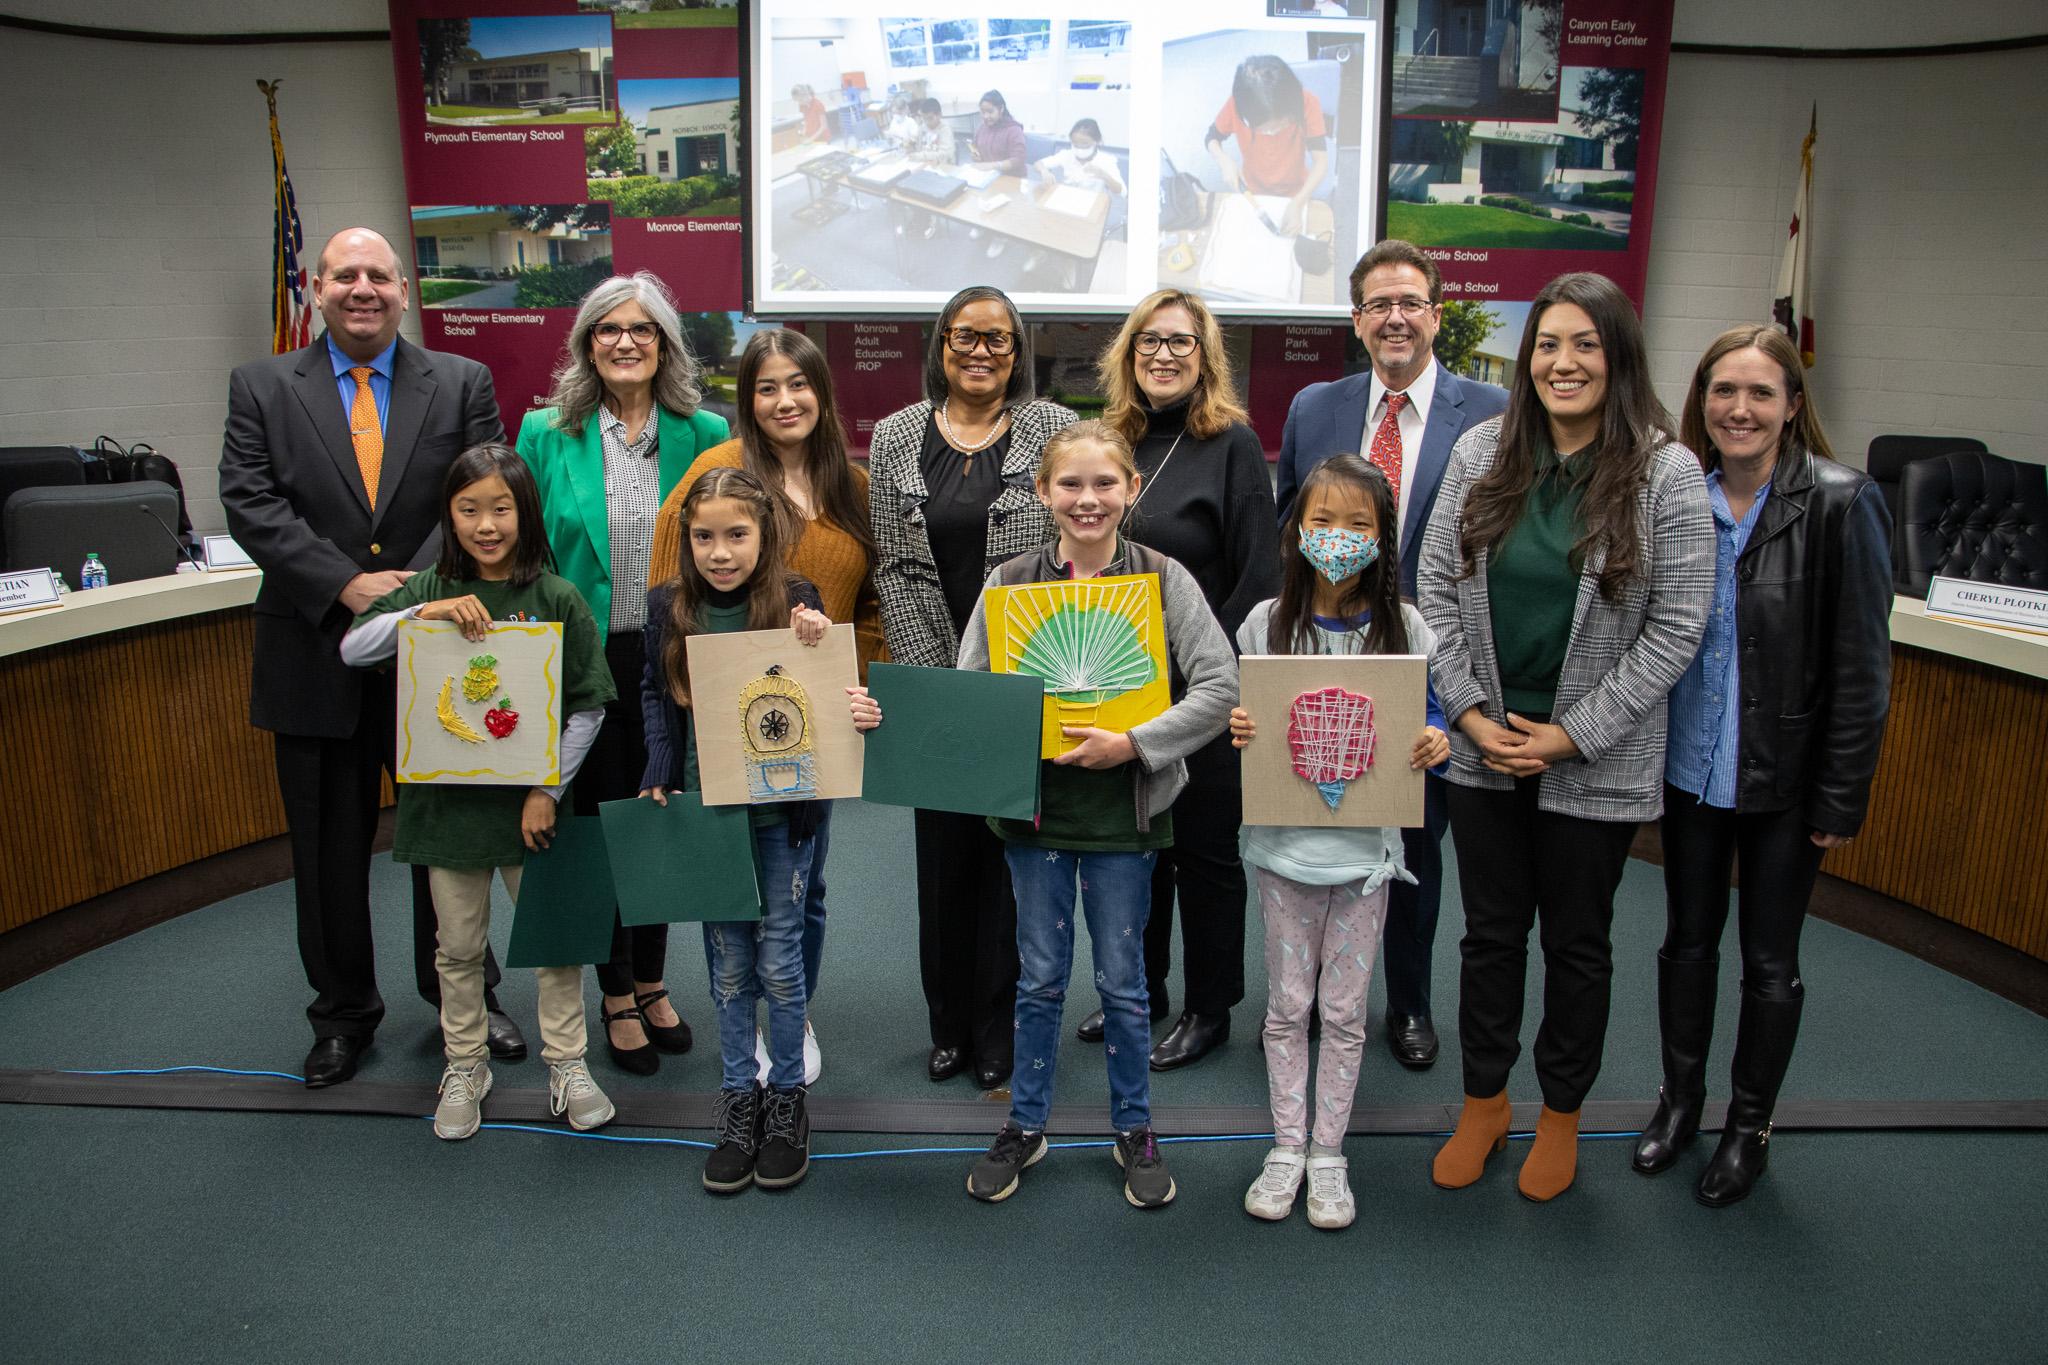 Plymouth Femineer students showed off some of the projects they’ve been working on this school year and did a fantastic job starting our Board meeting. 